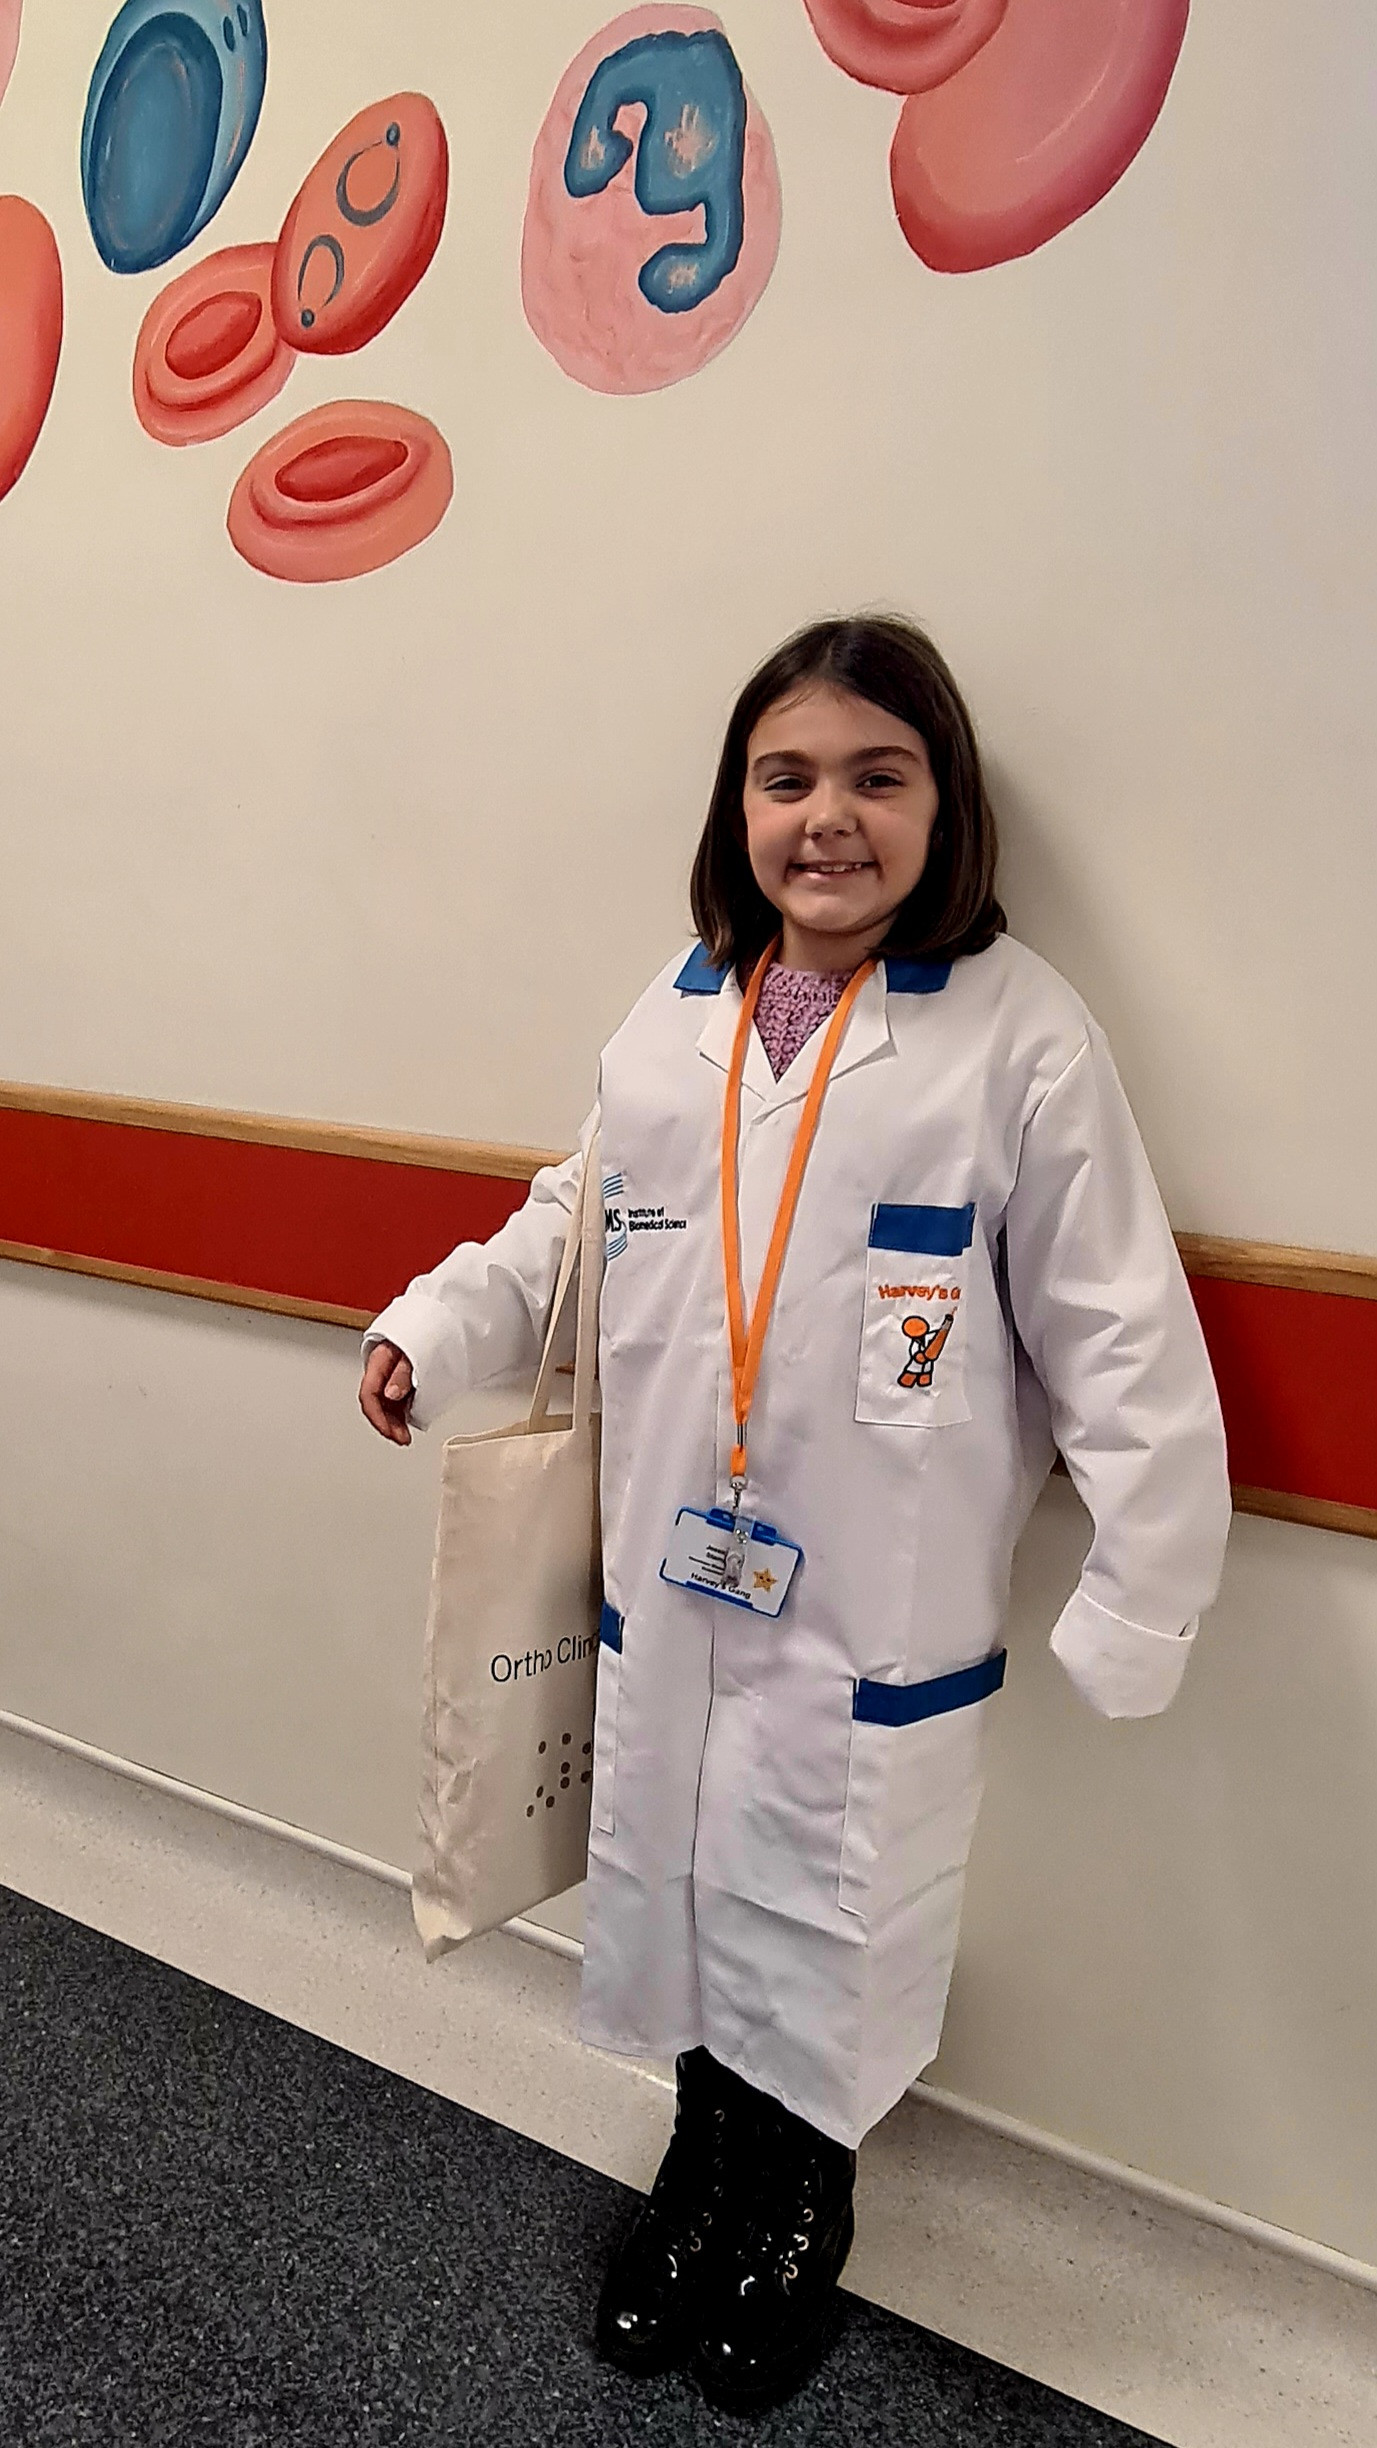 Jessica wearing her lab coat and lanyard and holding her goody bag